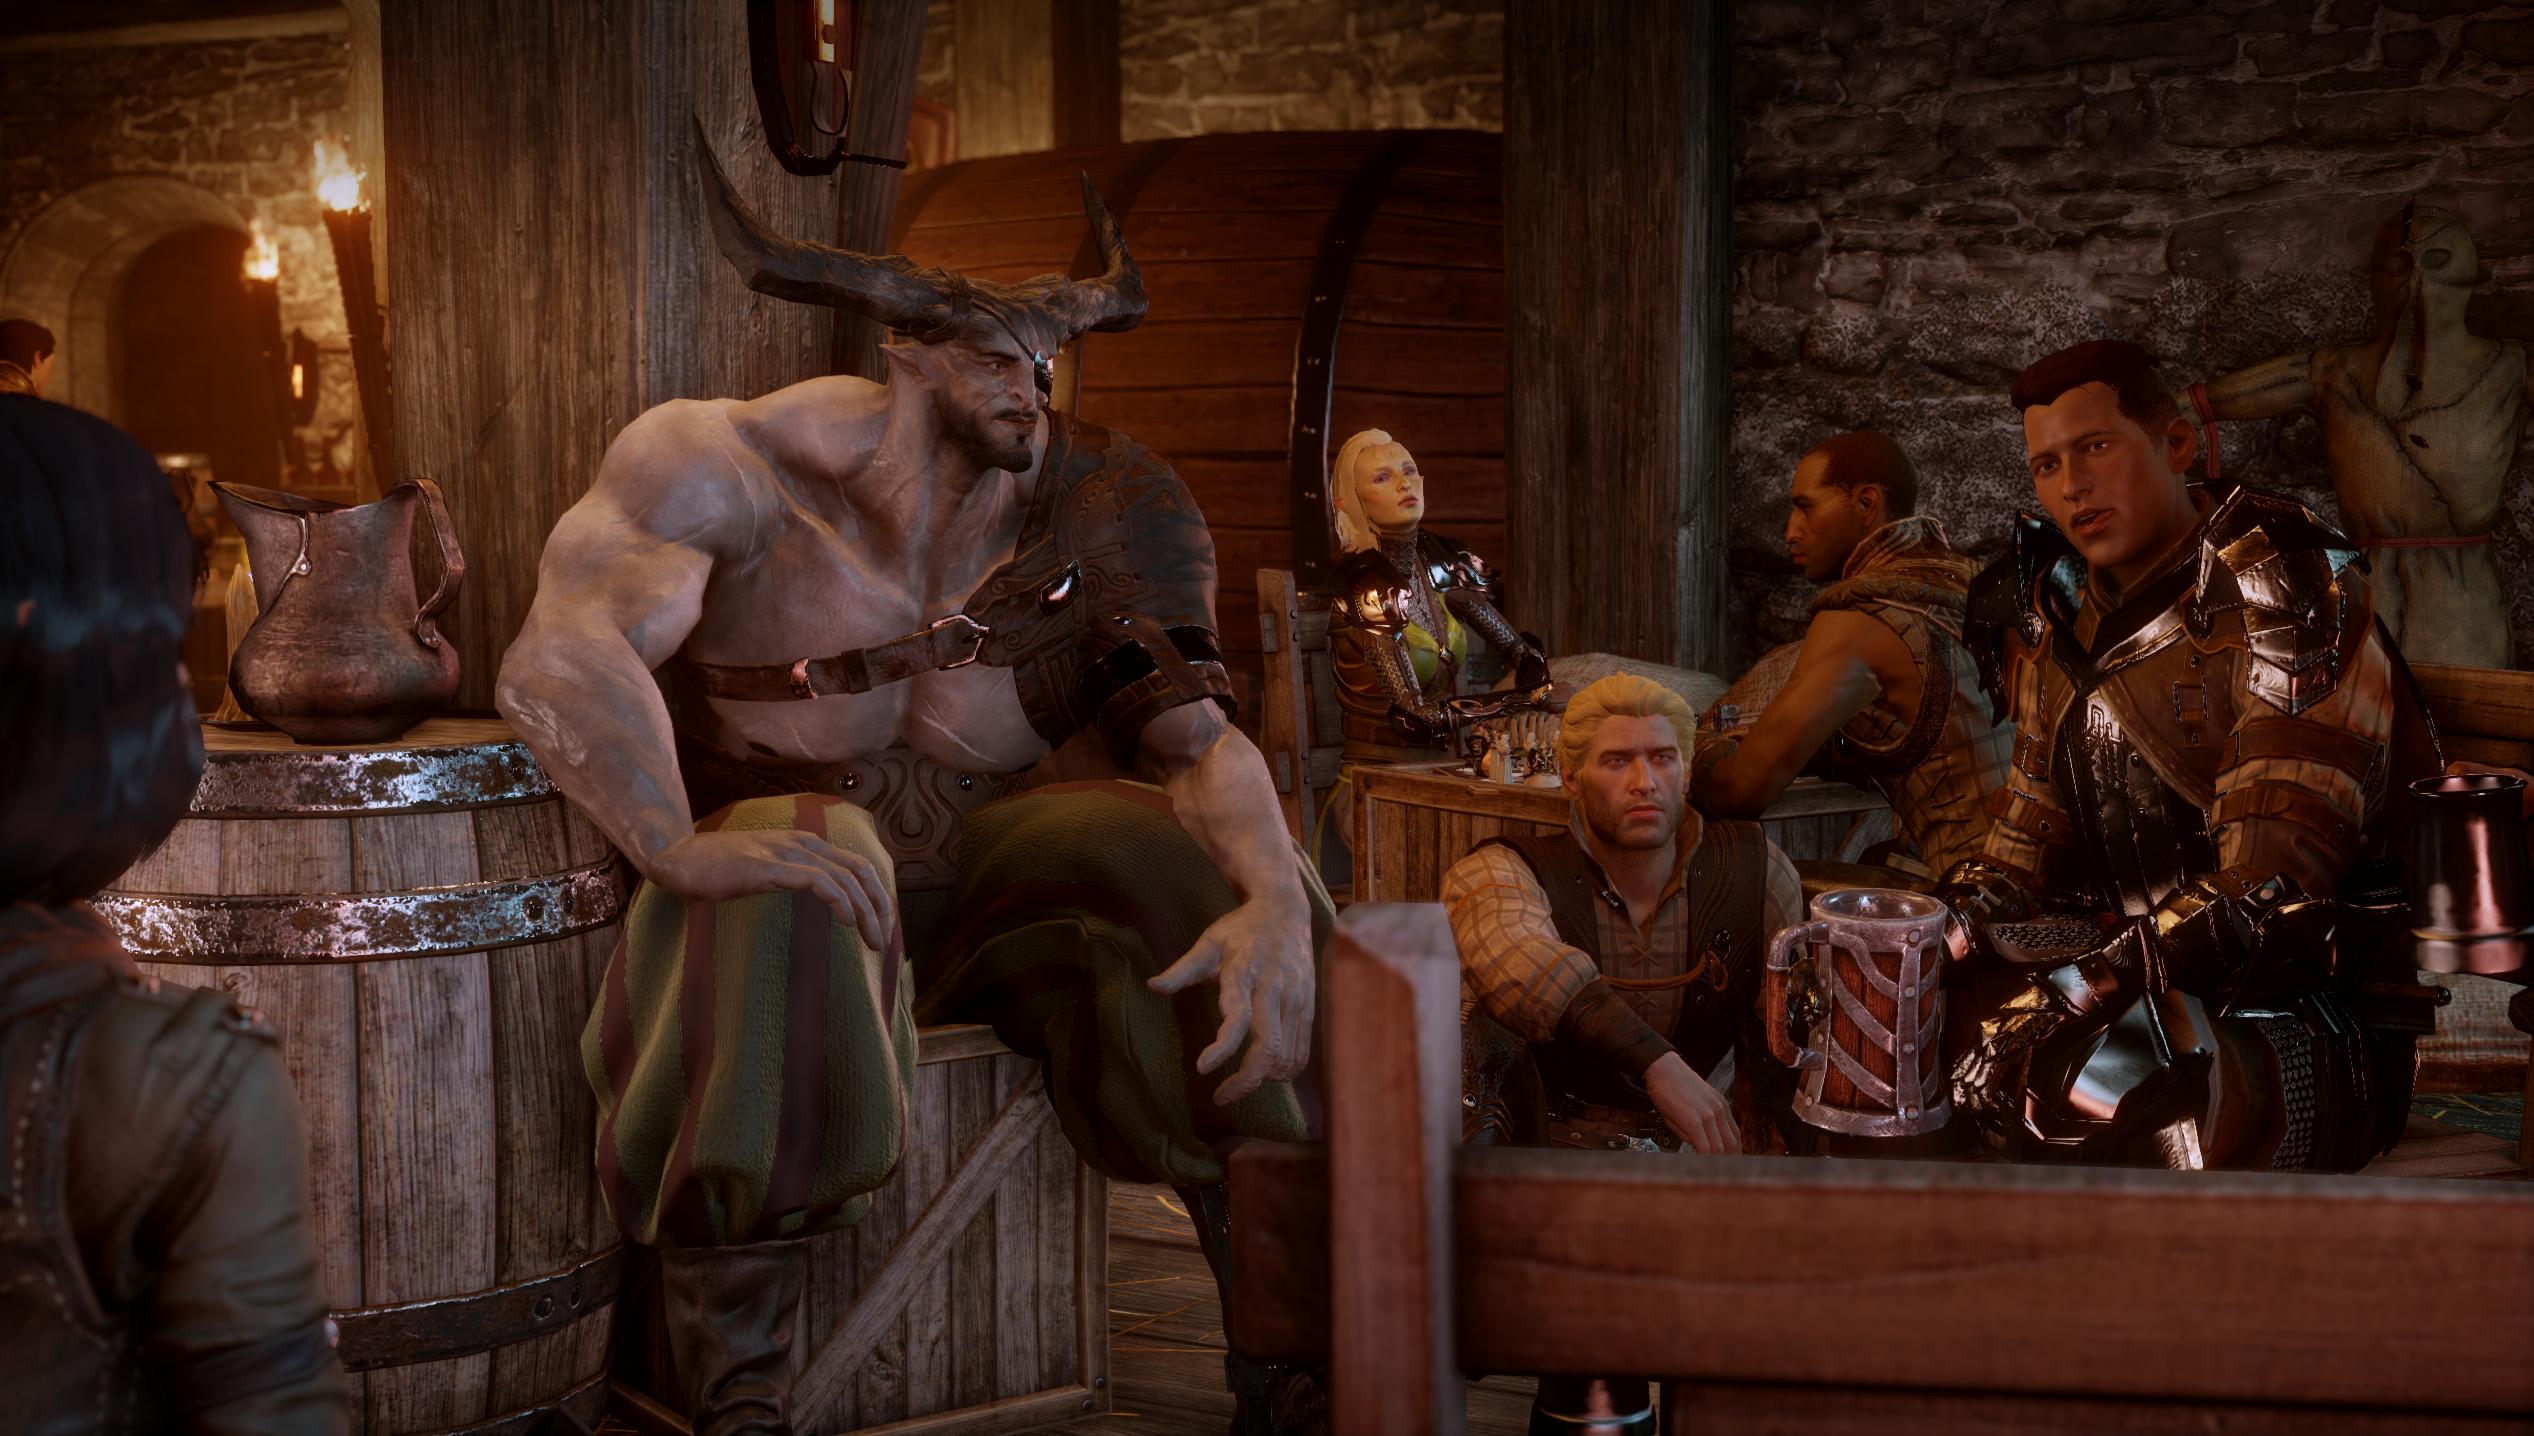 HD wallpaper, Drinking, Video Games, Pc Gaming, The Chargers, Iron Bull, Orange, Dragon Age